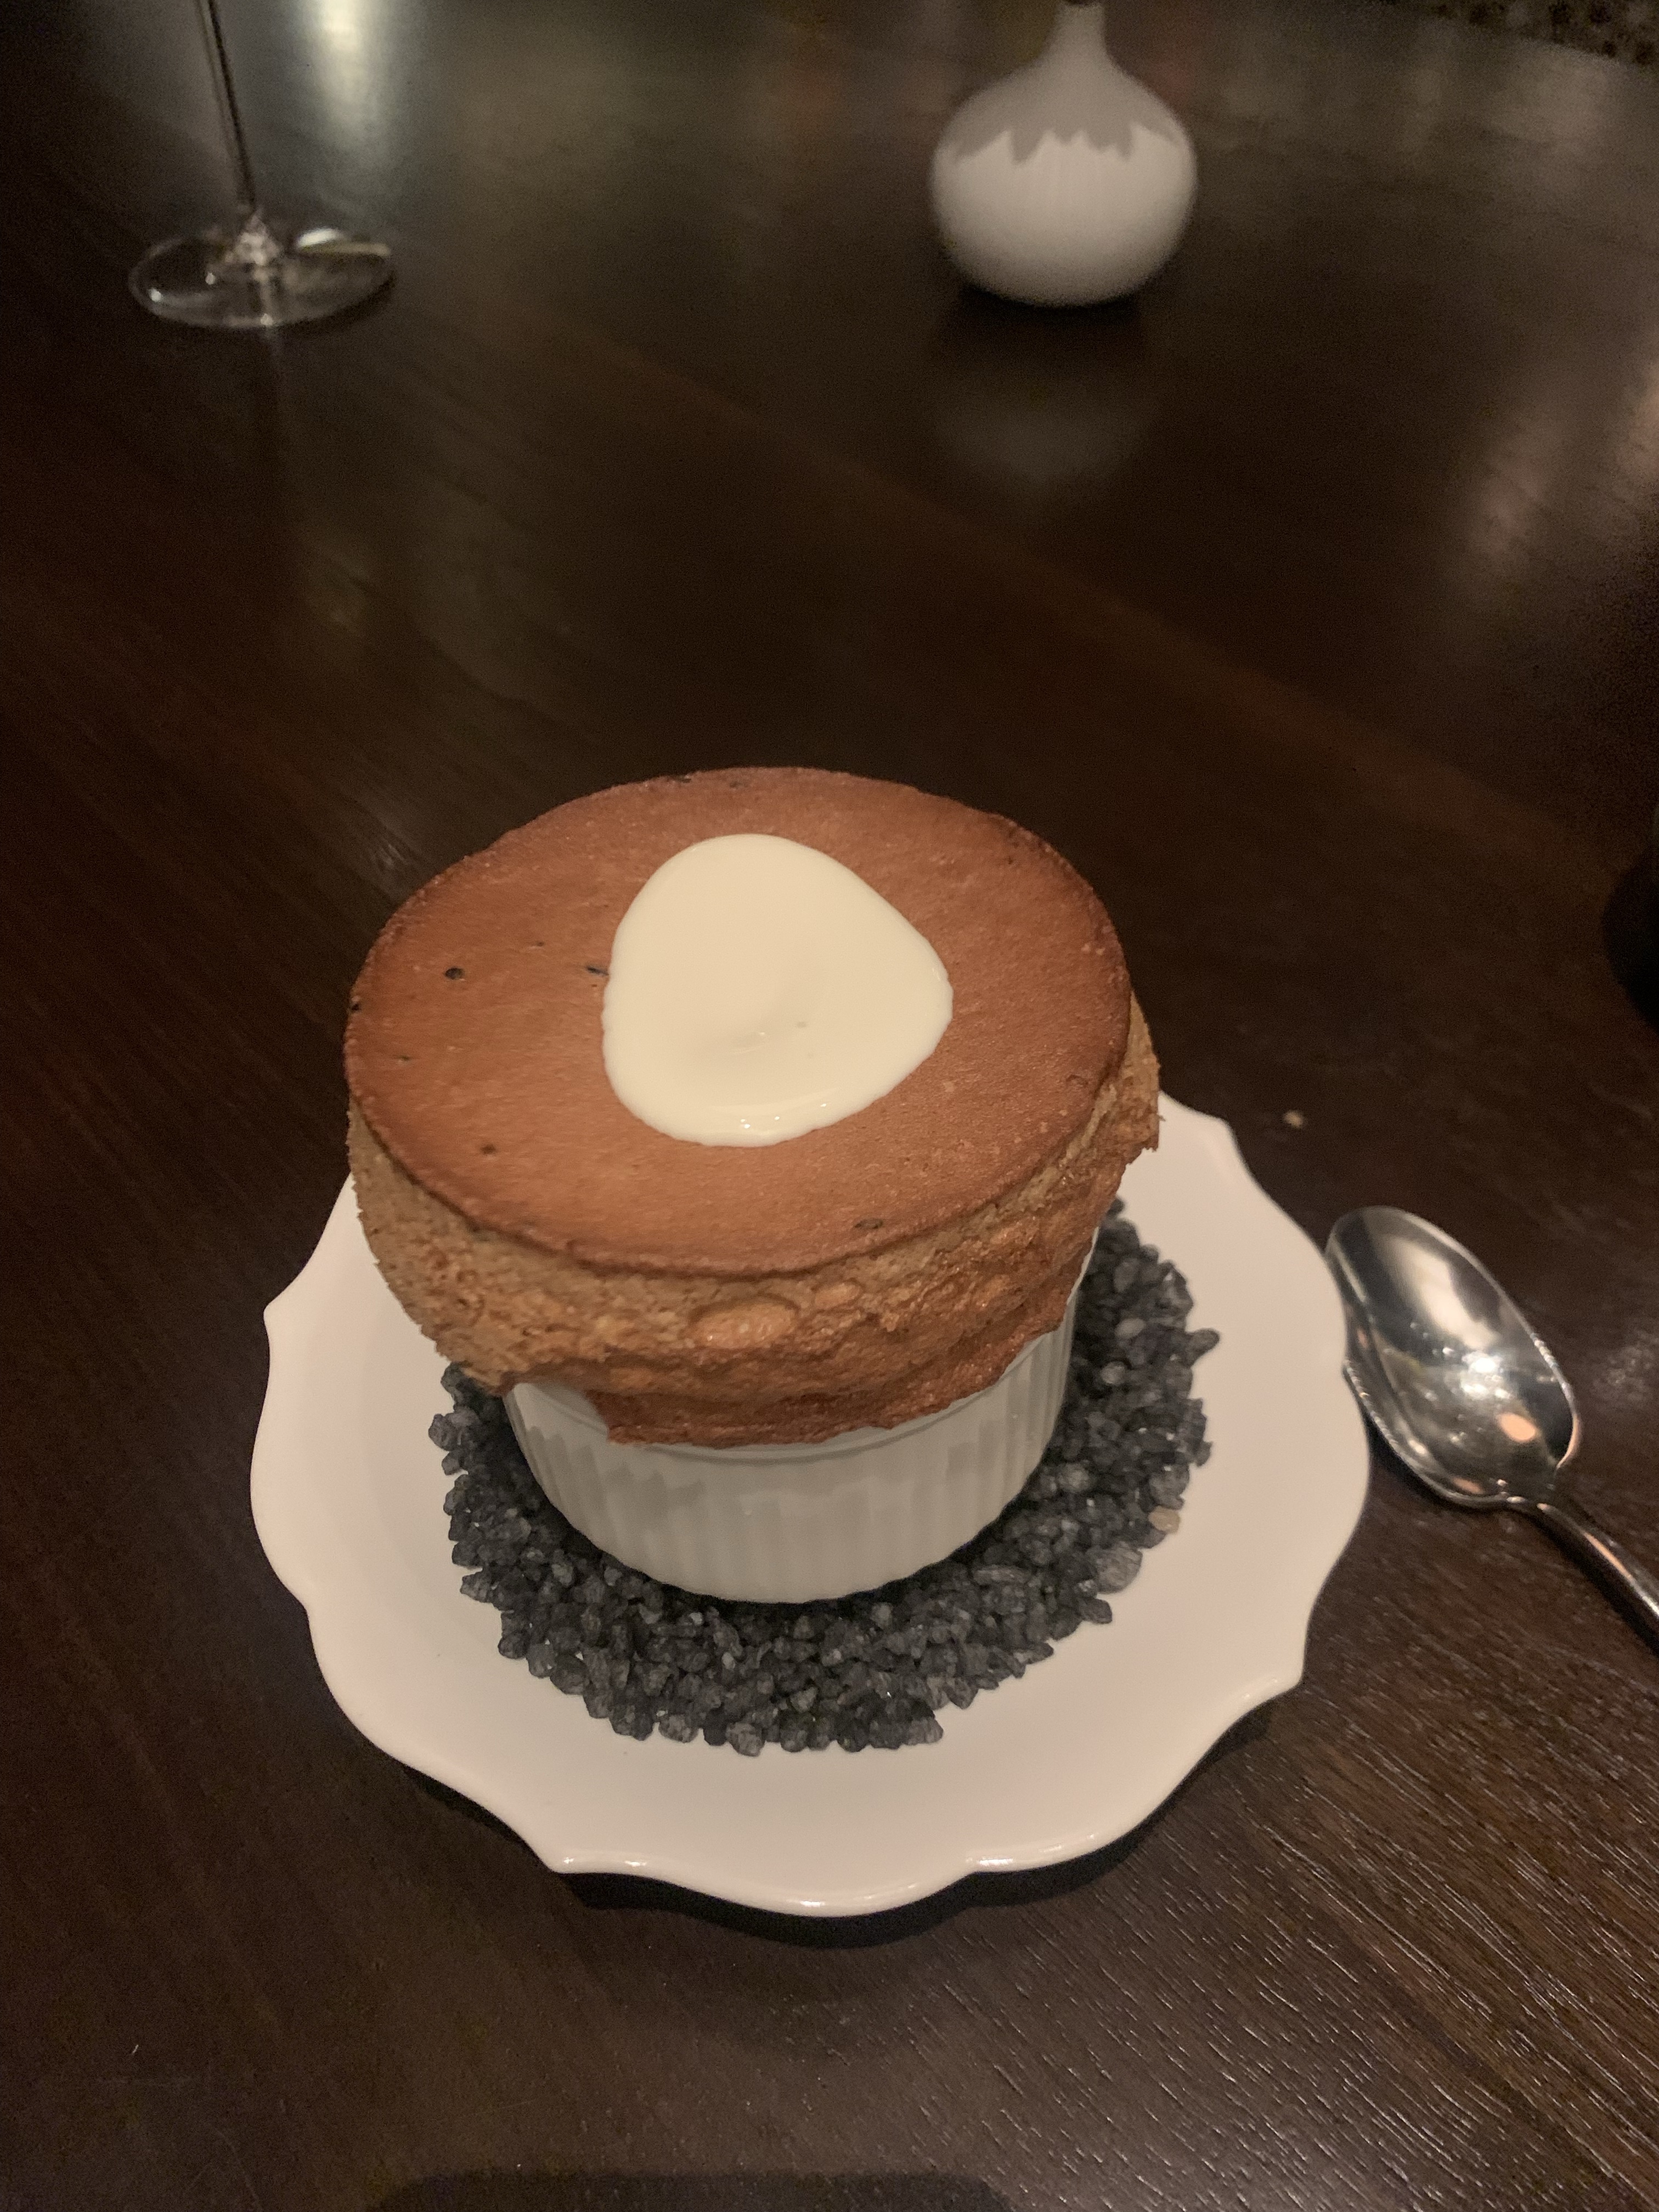 Souffle, with a large golden-brown head coming out of the cup, and some cheese sauce in the middle